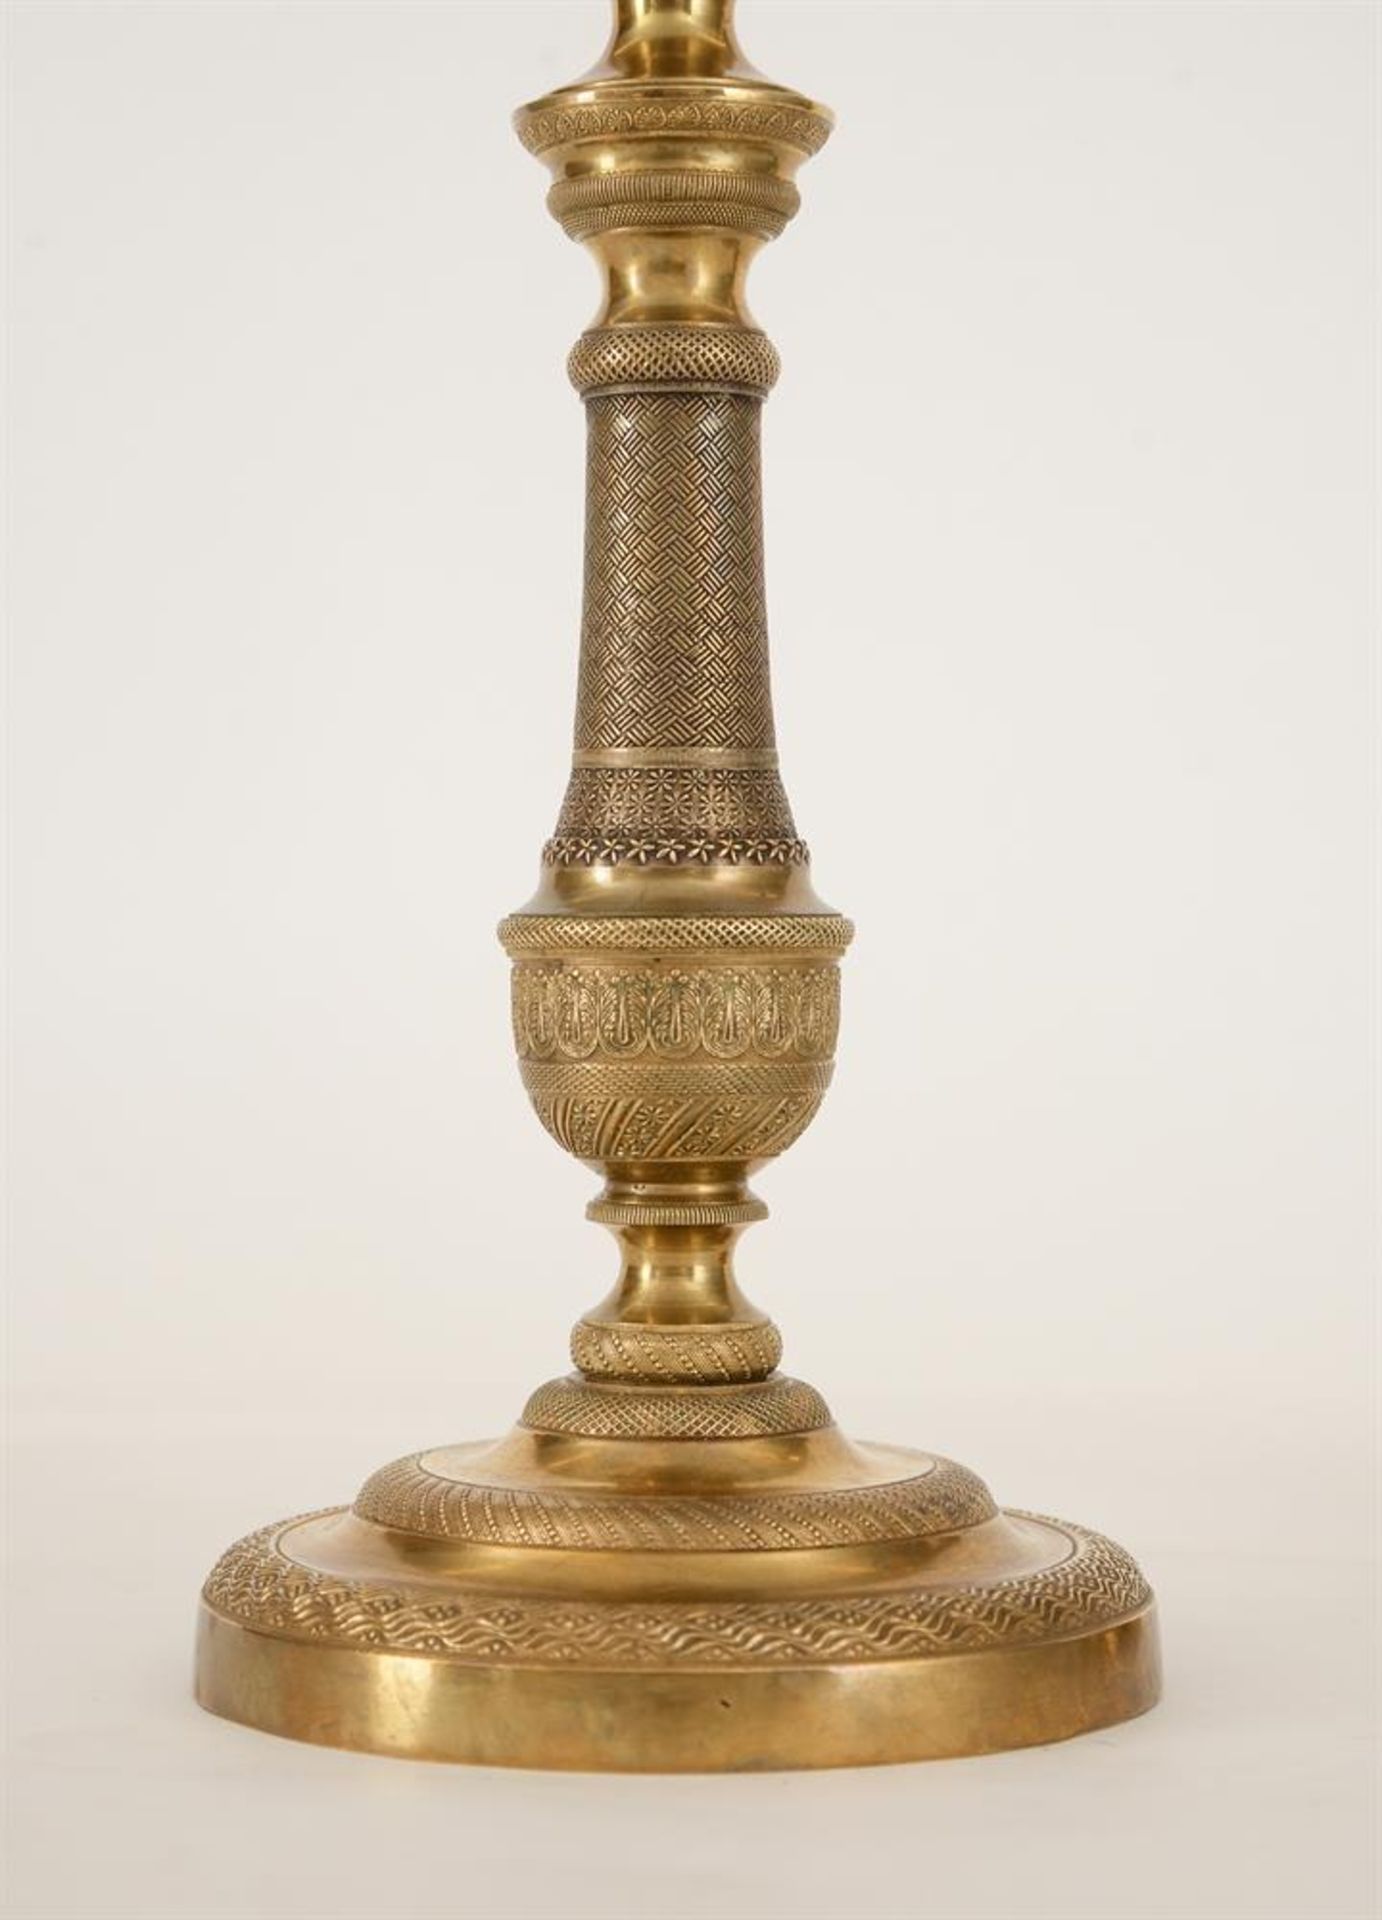 A PAIR OF FRENCH BRASS CANDLESTICKS, IN THE EMPIRE MANNER, LATE 19TH CENTURY - Image 3 of 5